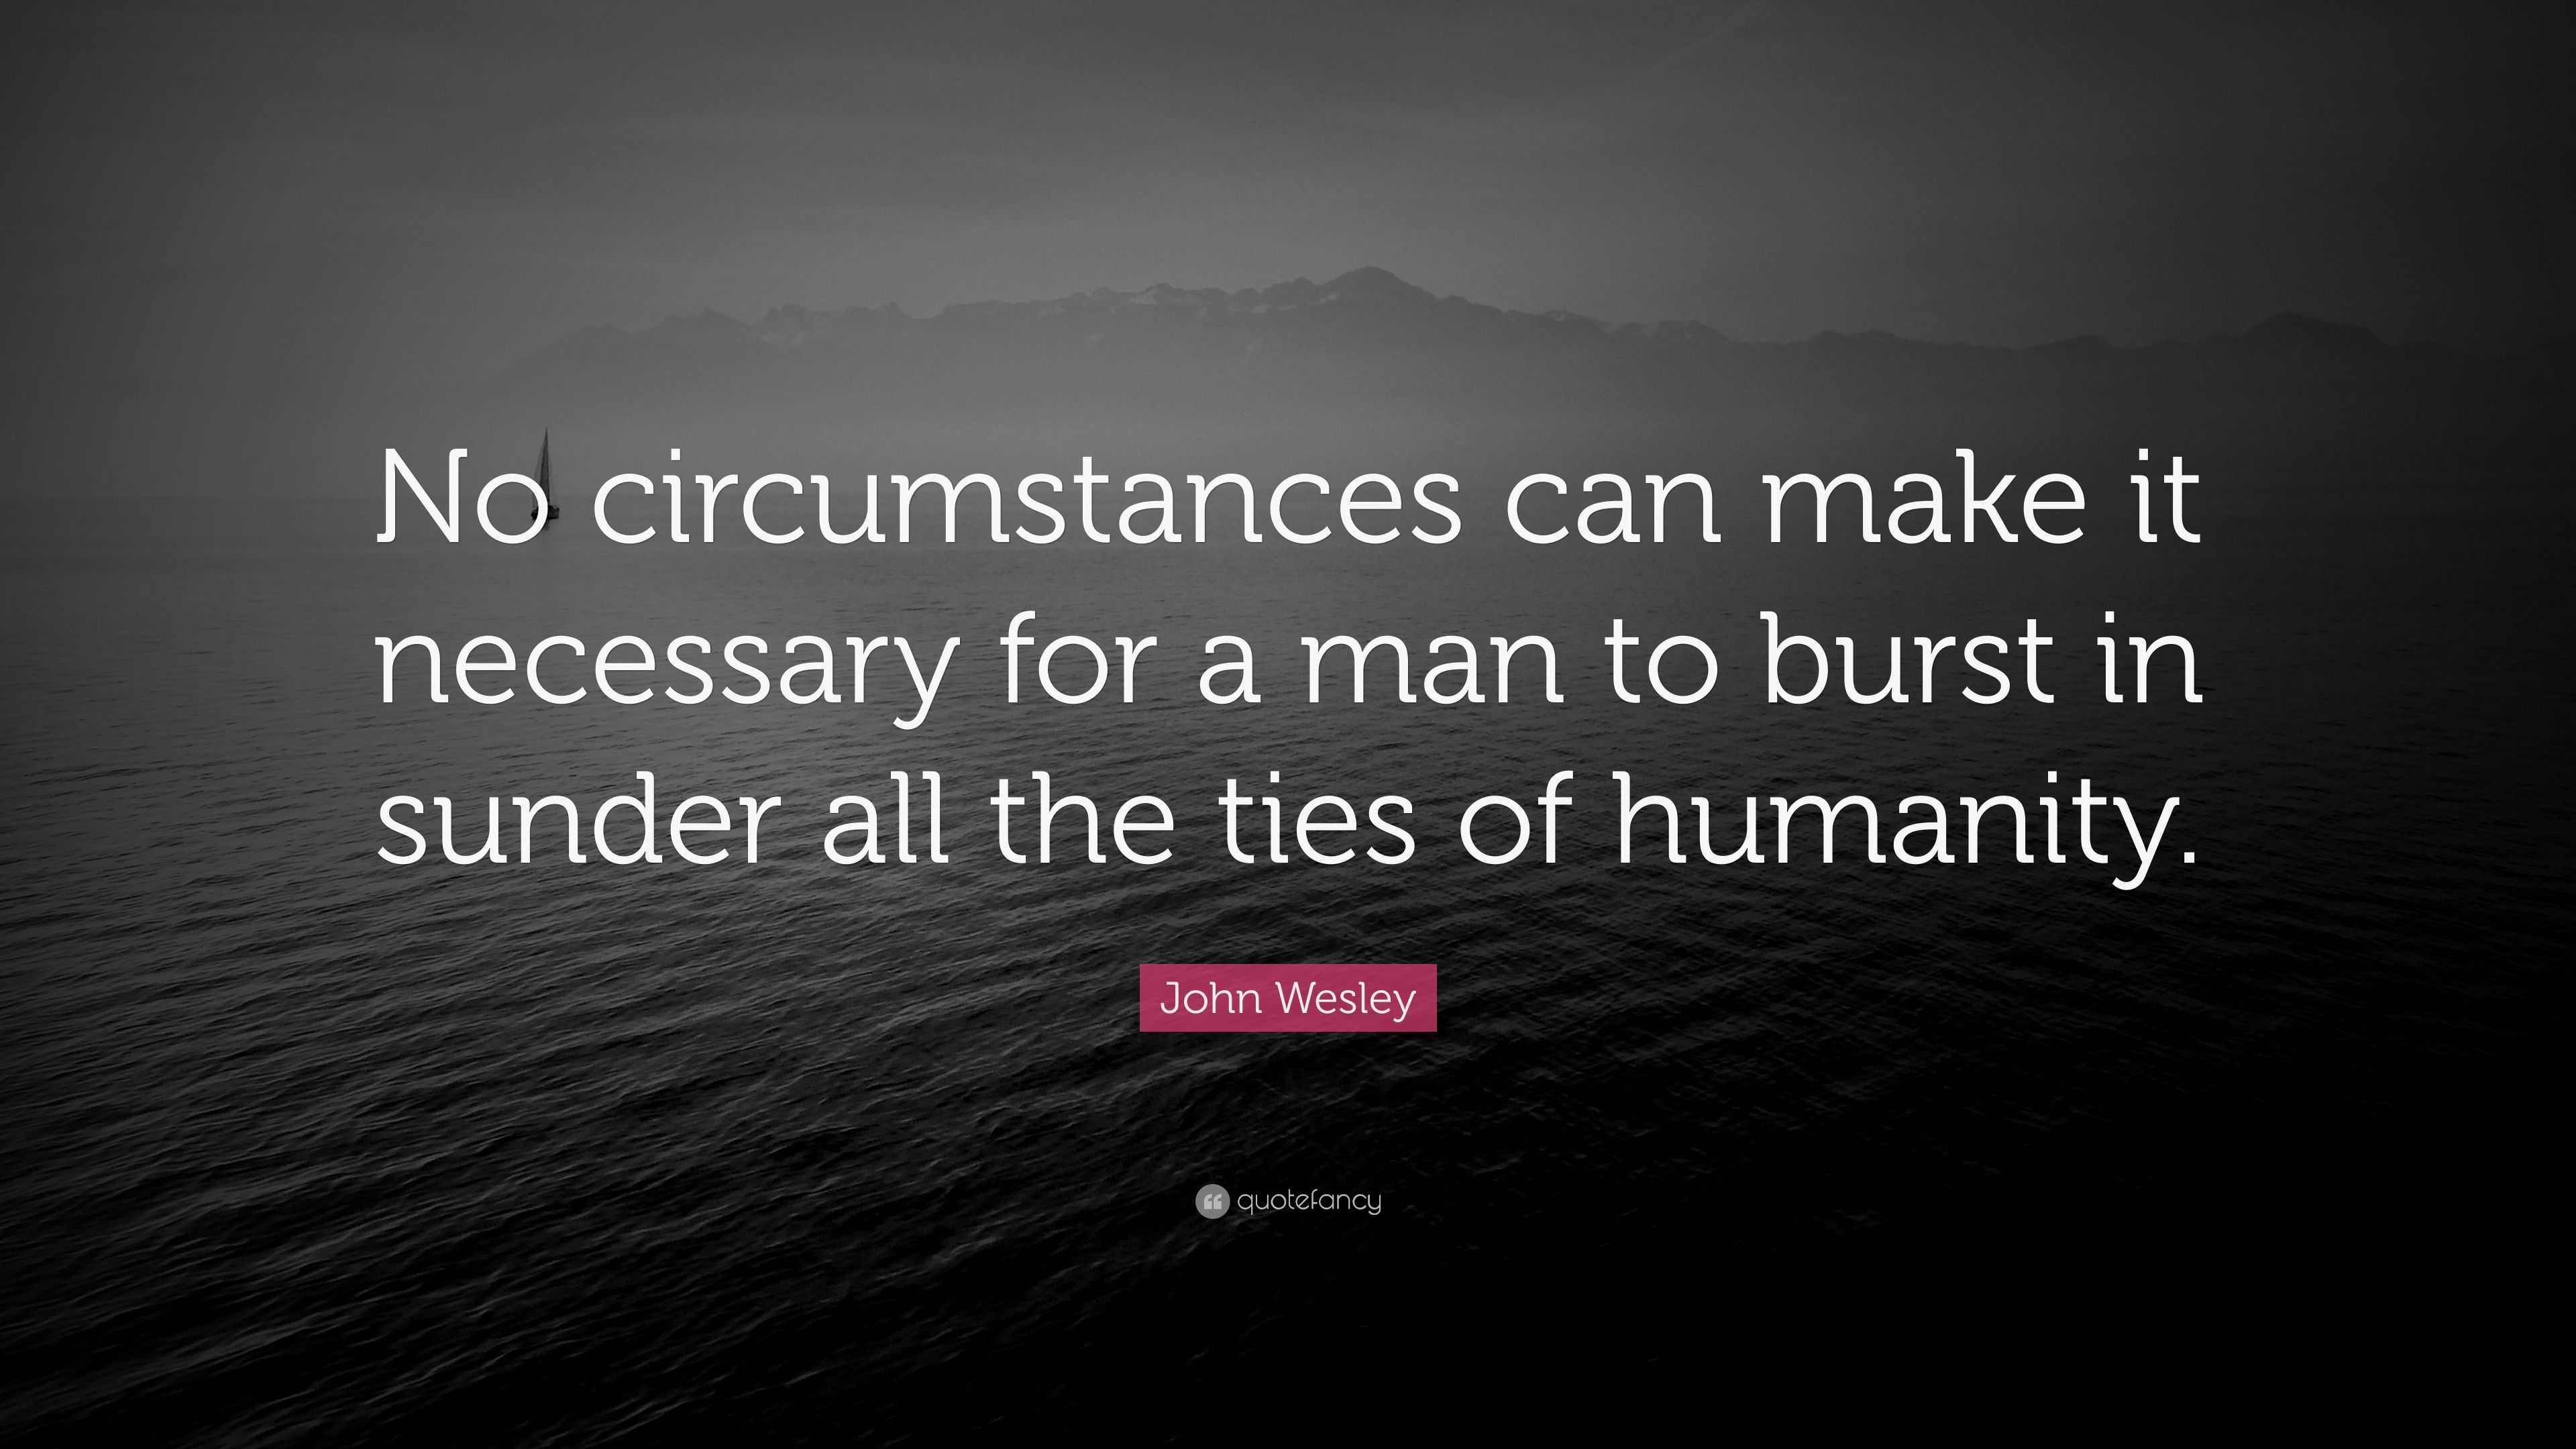 John Wesley Quote: “No circumstances can make it necessary for a man to ...